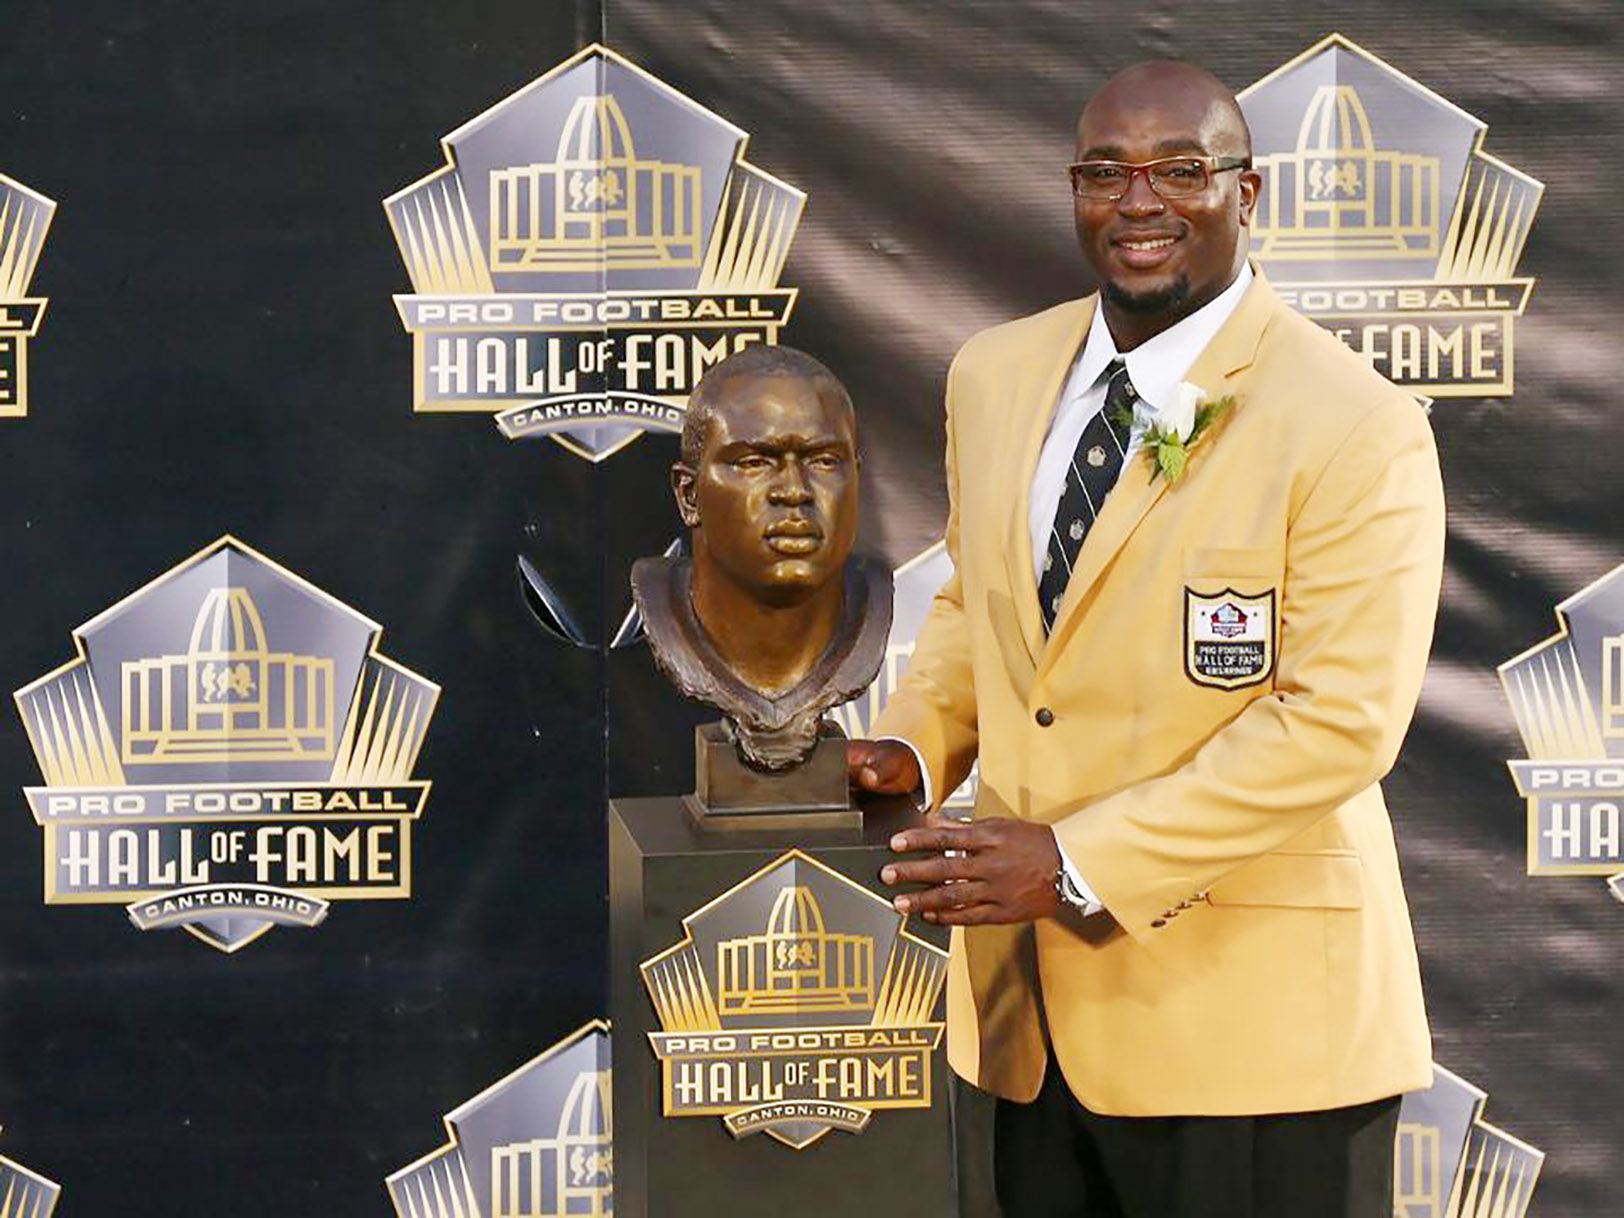 will shields Hall of Fame & the bust